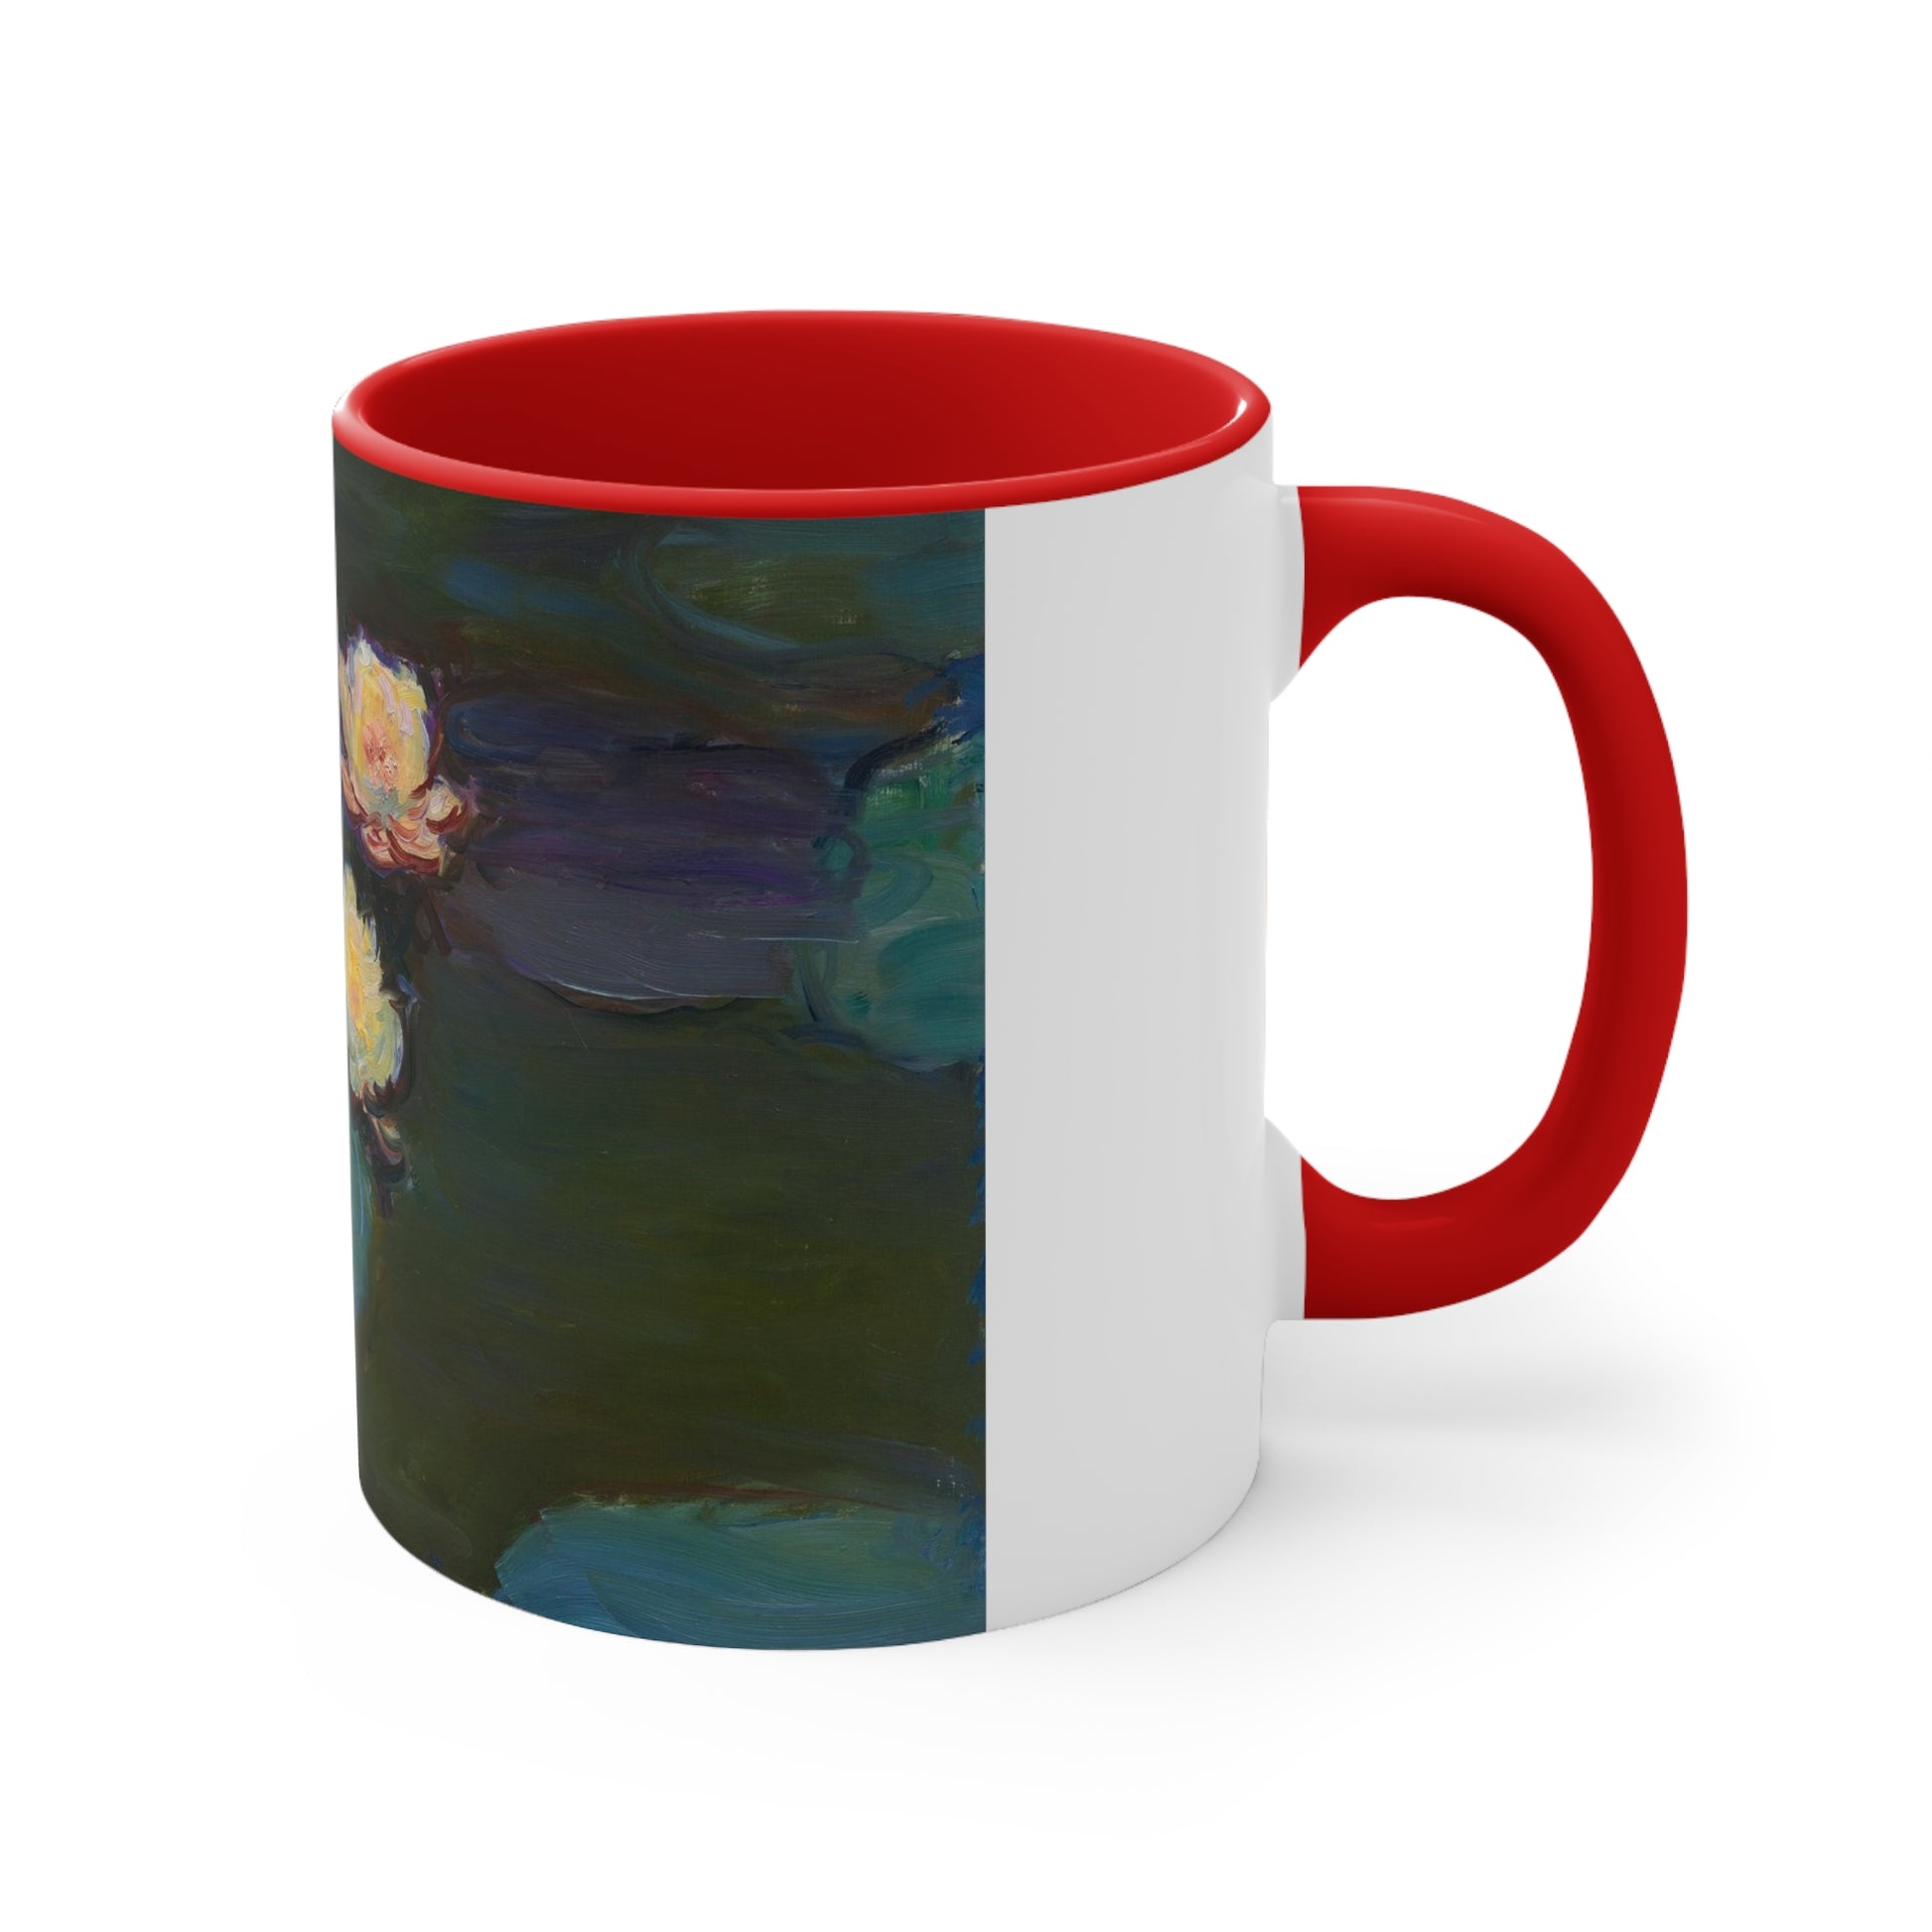 a red and white coffee mug with a painting of a flower